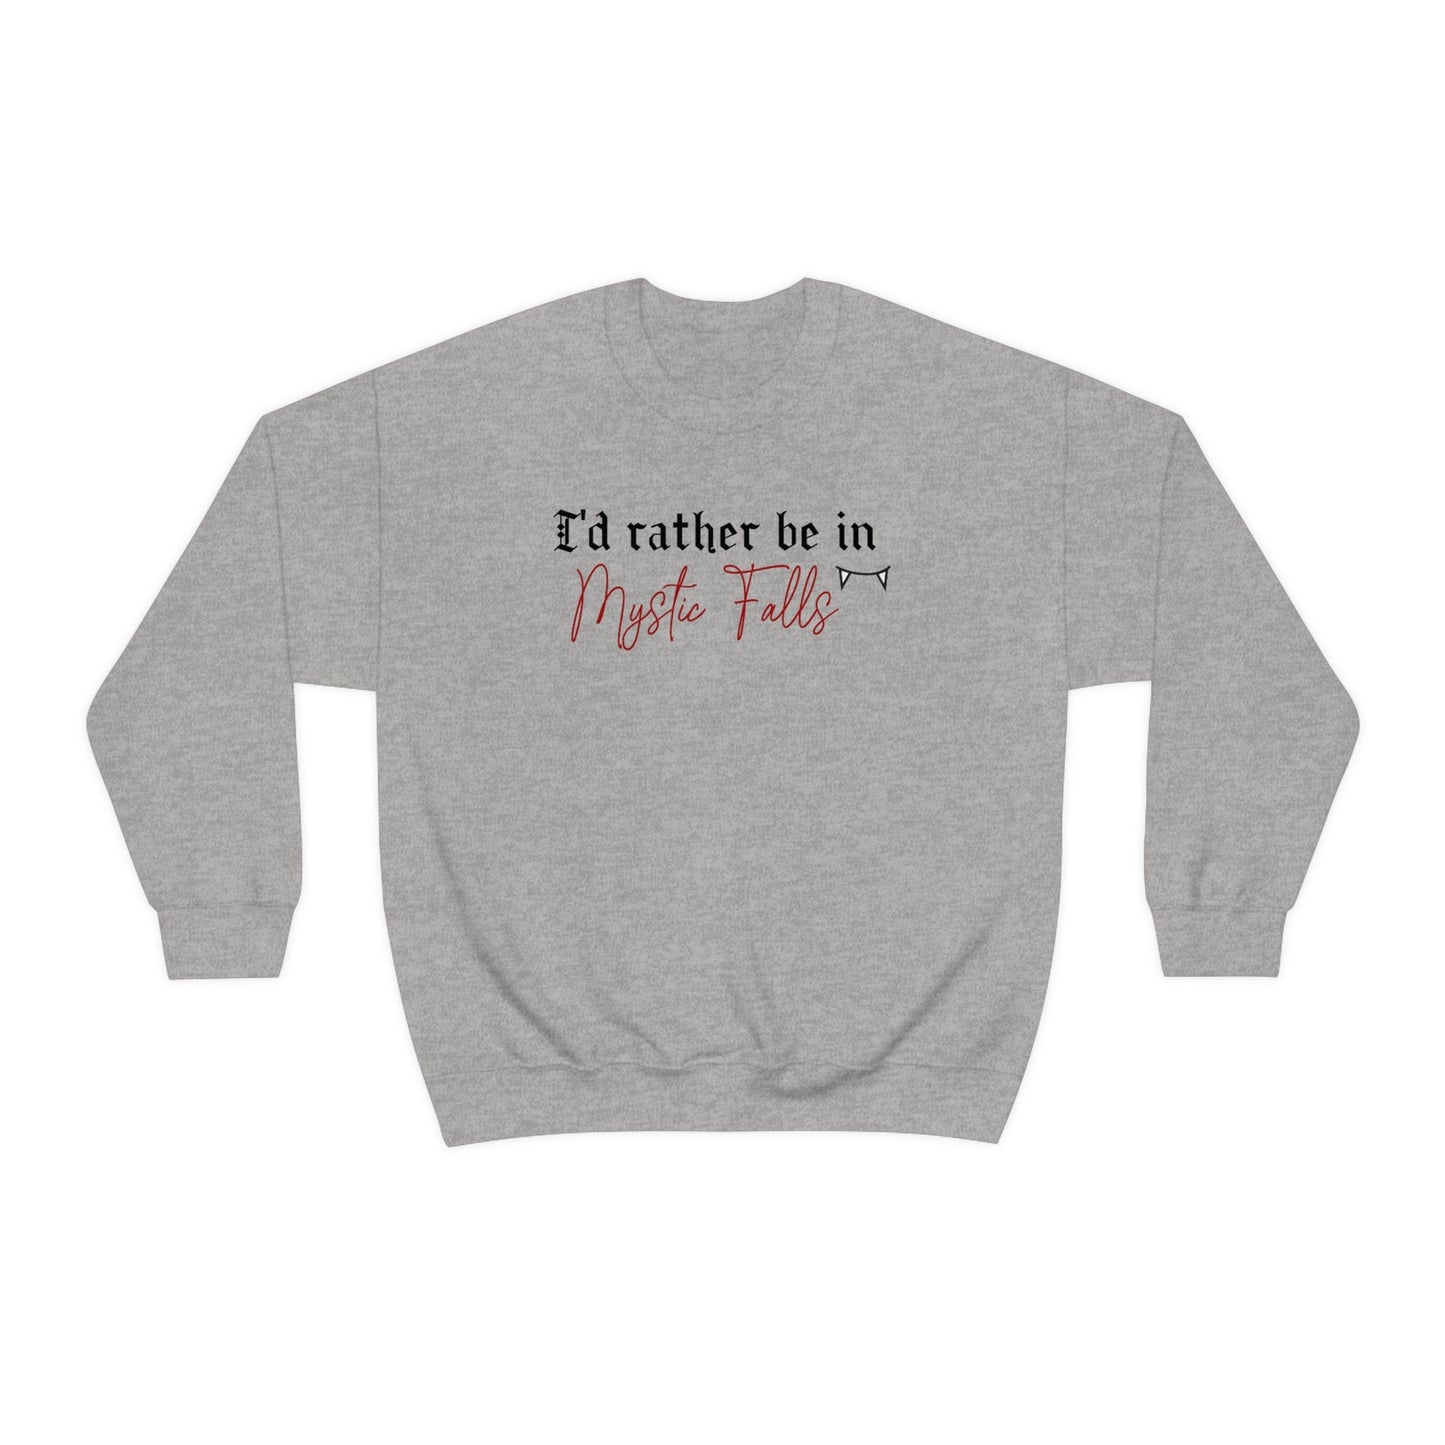 I'd rather be in Mystic Falls Sweatshirt, TVD Sweatshirt, Mystic Fall Sweatshirt, TVD Fan gift, Salvatore brothers